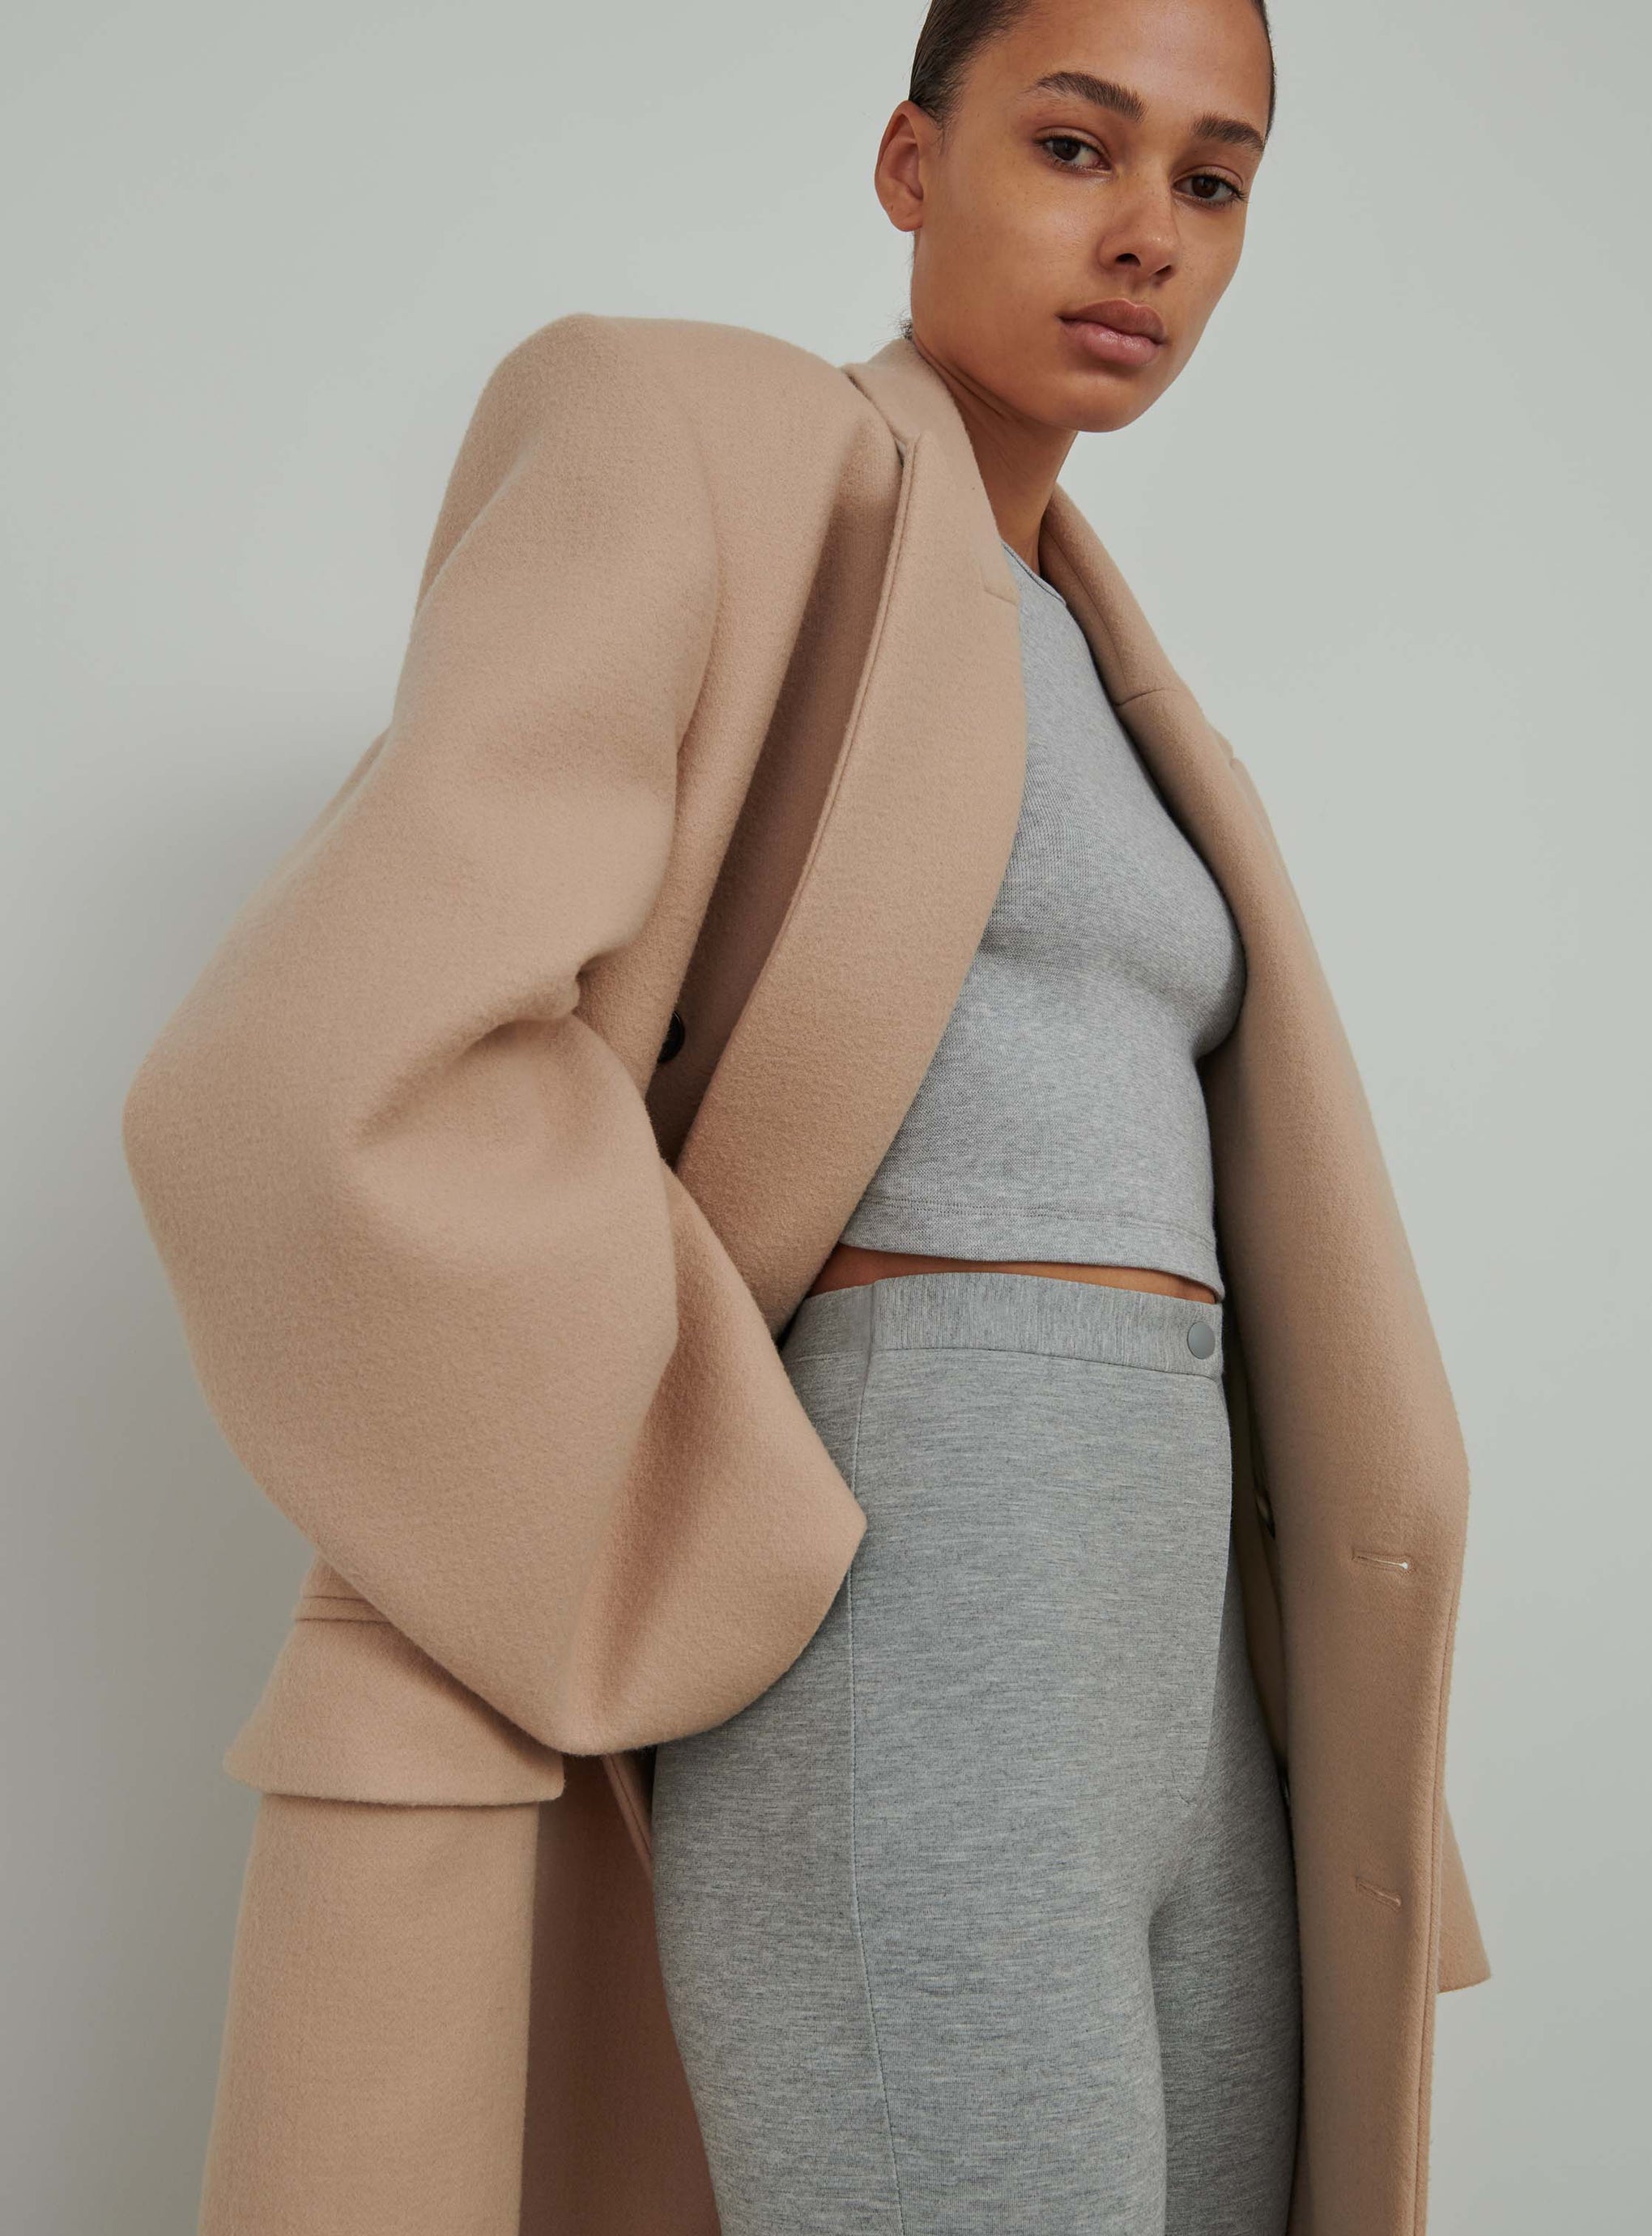 The Wardrobe NYC HB Coat in Biscuit available at The New Trend Australia